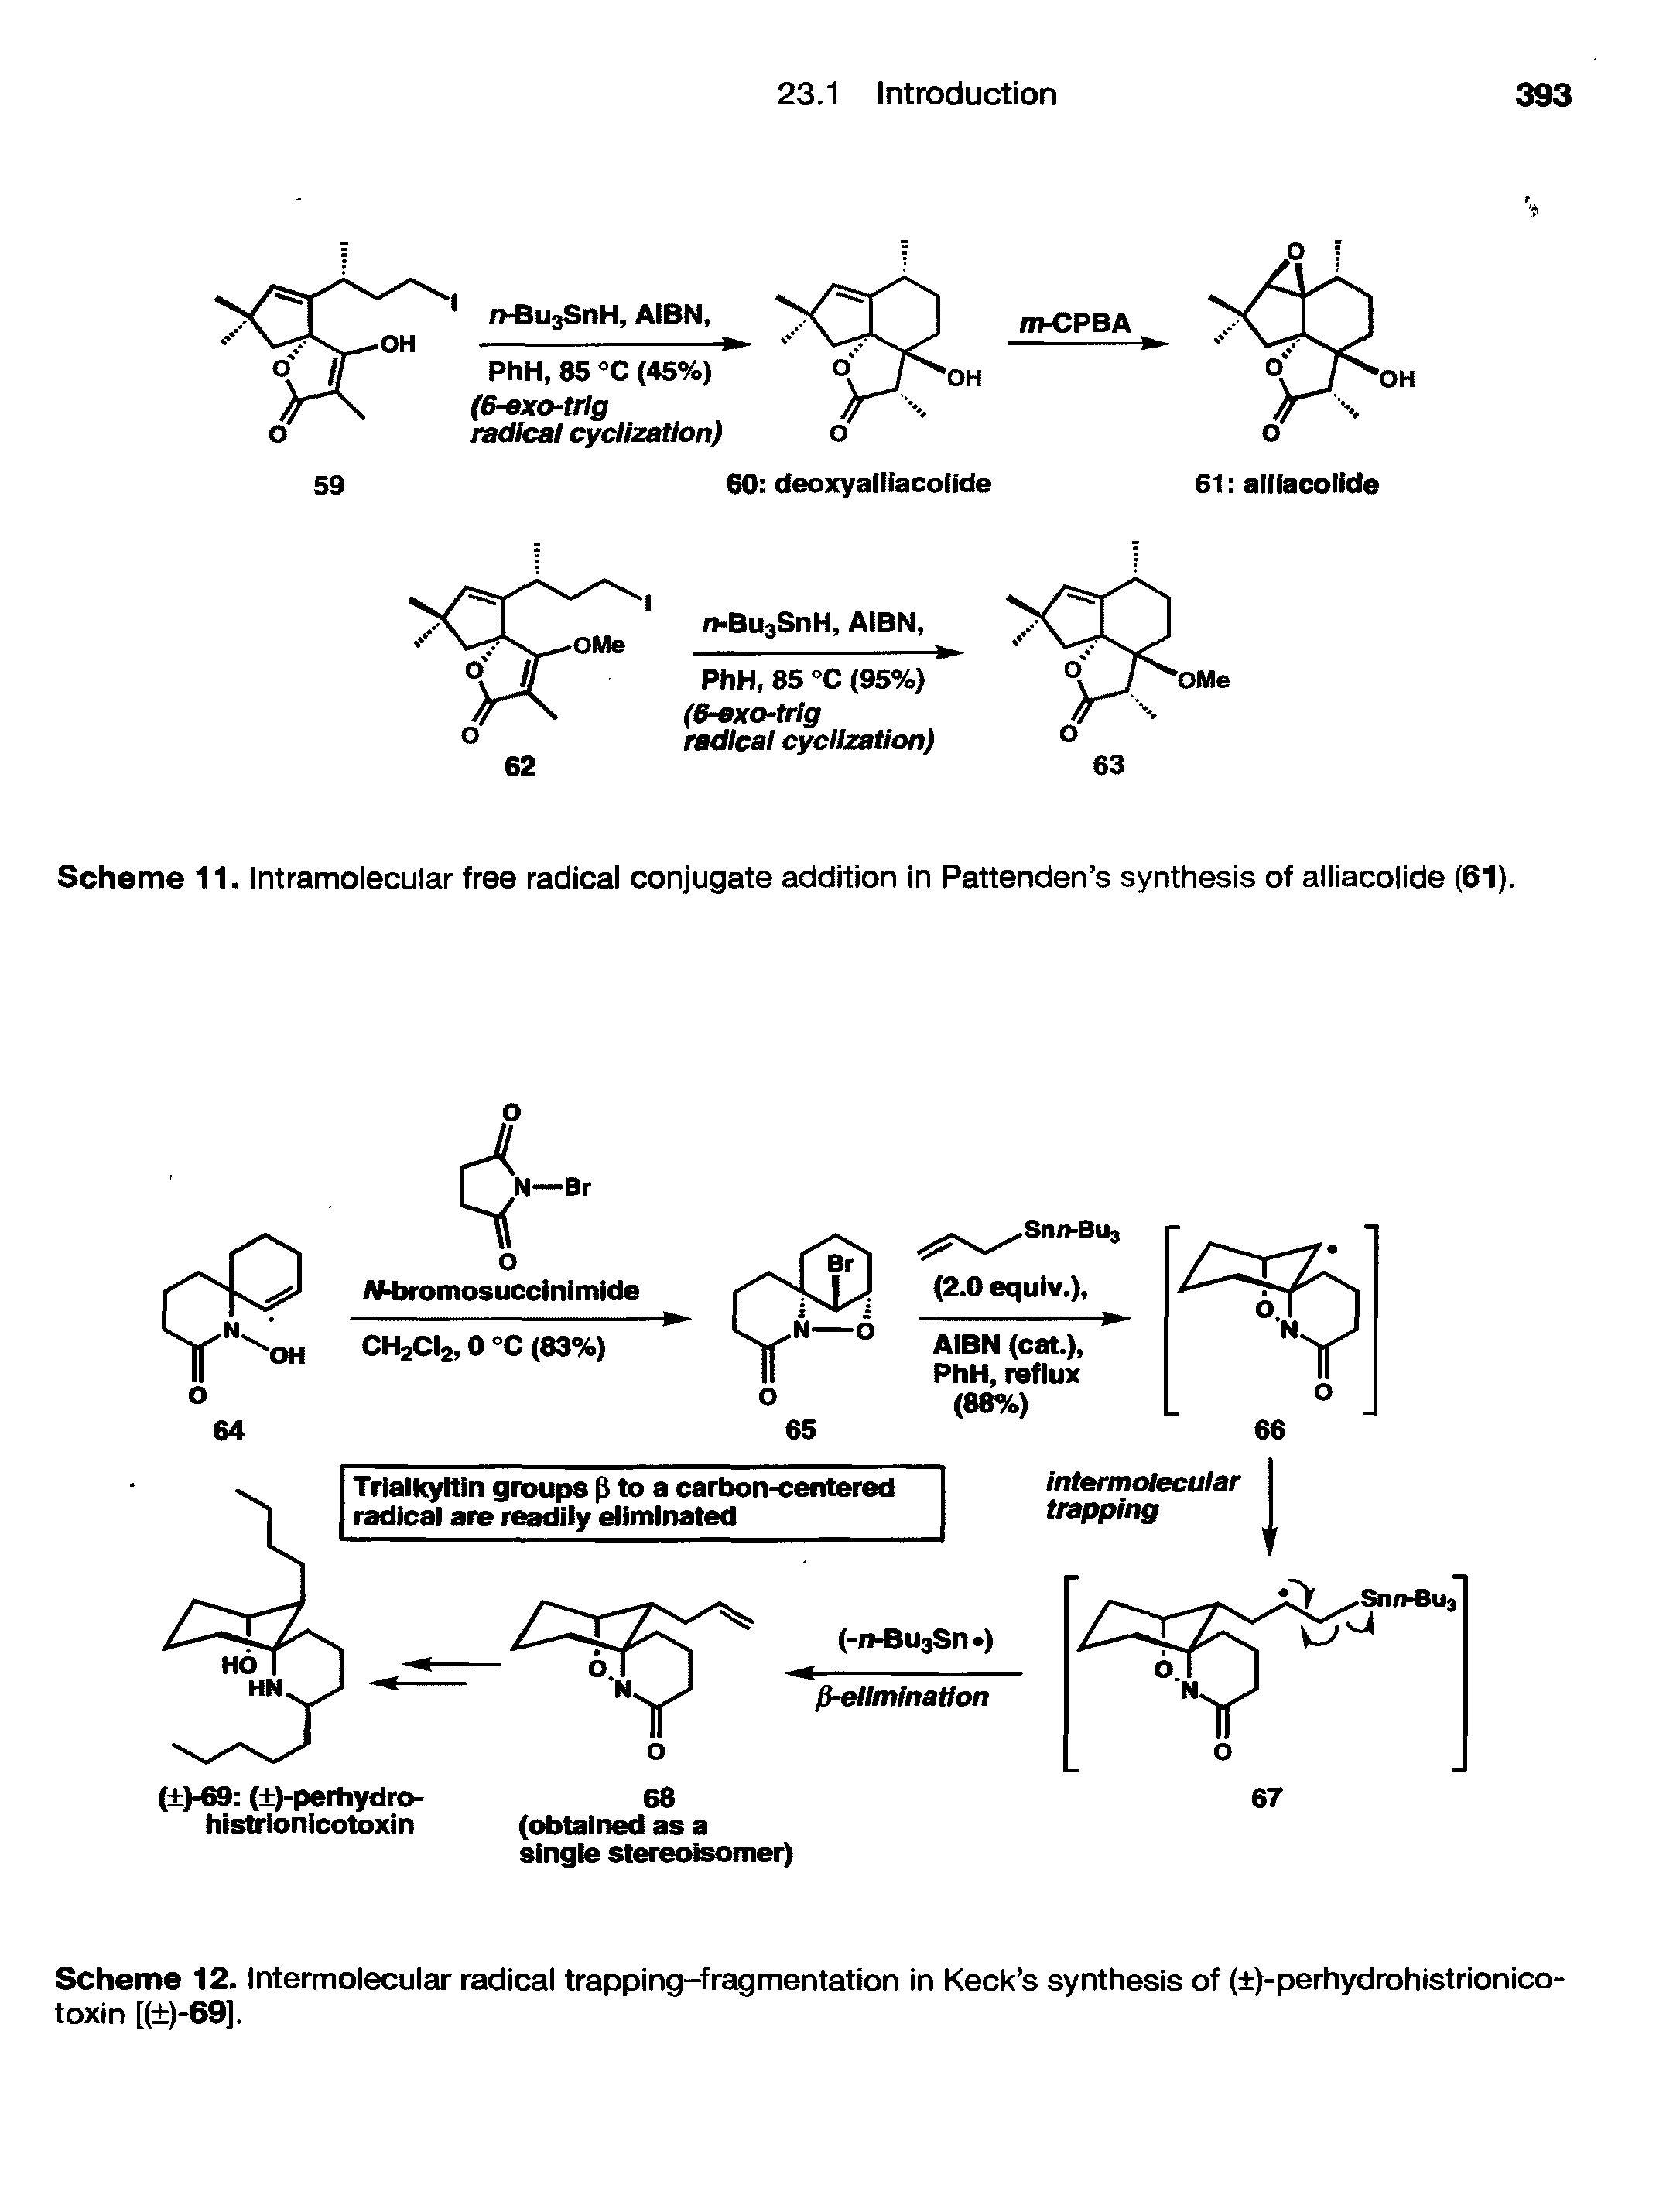 Scheme 12. Intermolecular radical trapping-fragmentation in Keck s synthesis of ( )-perhydrohistrionico-toxin [( )-69].